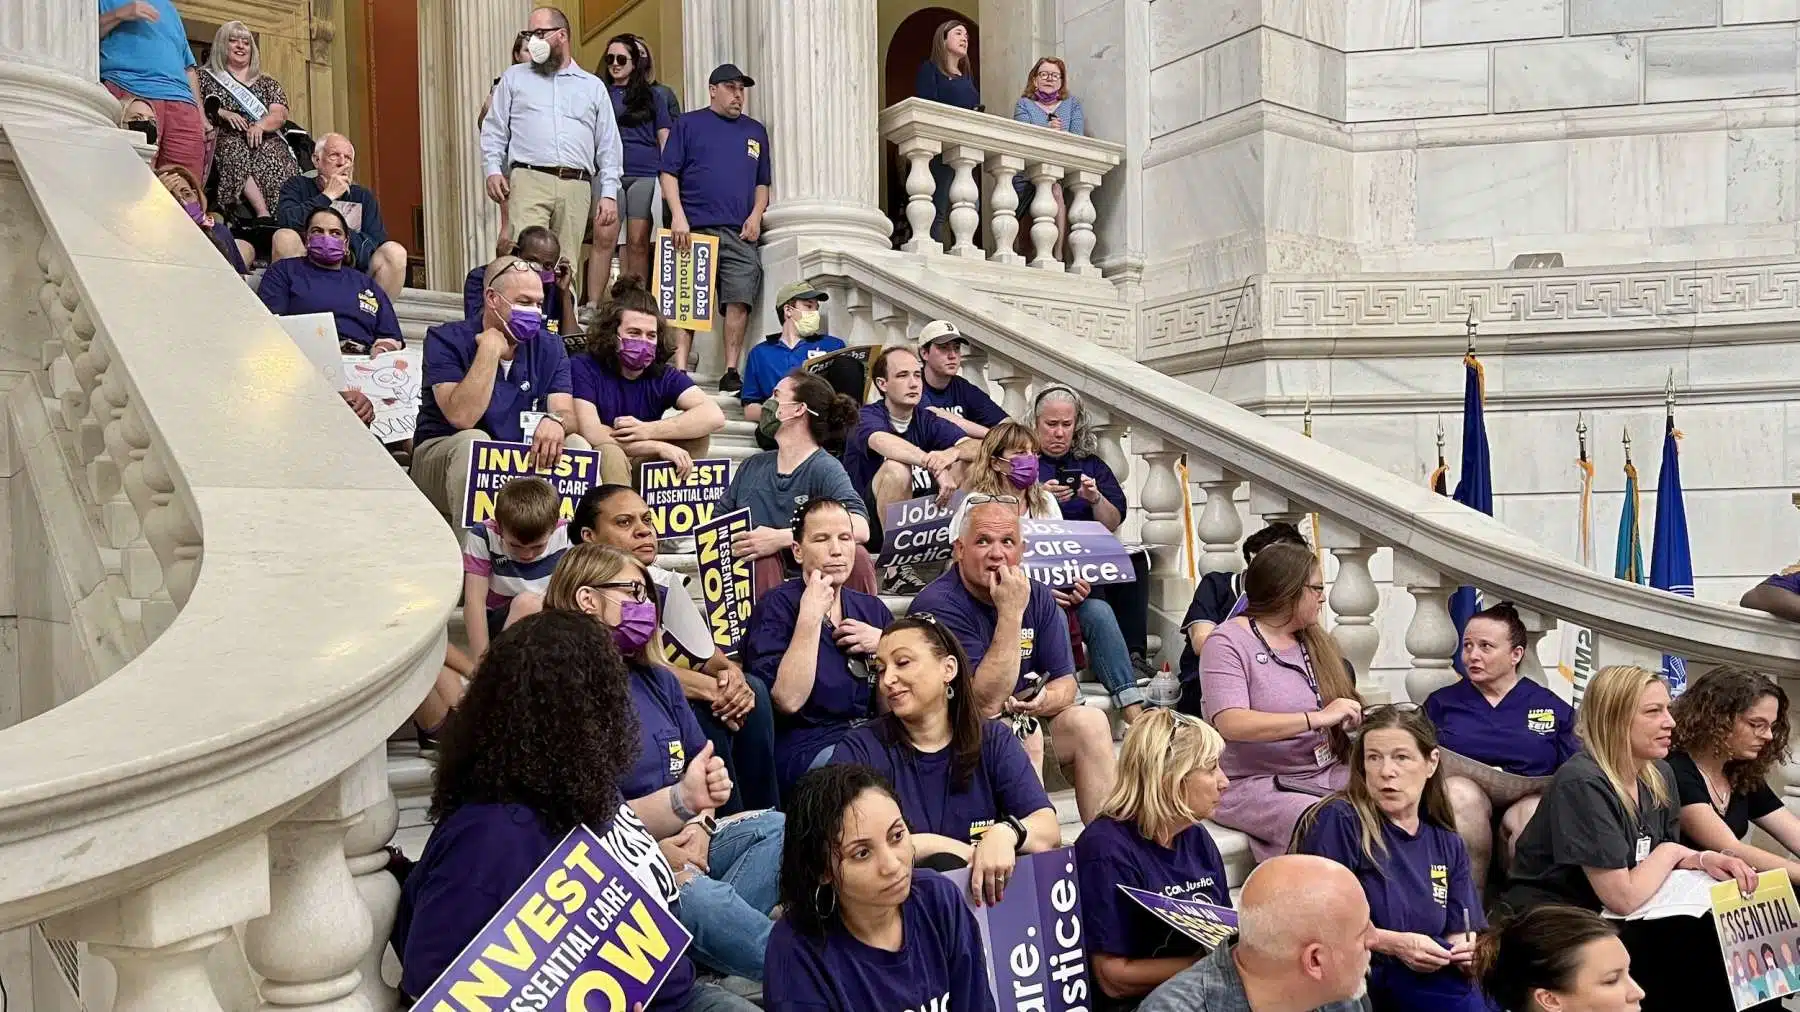 Essential healthcare workers hold State House rally to demand investment now, not later